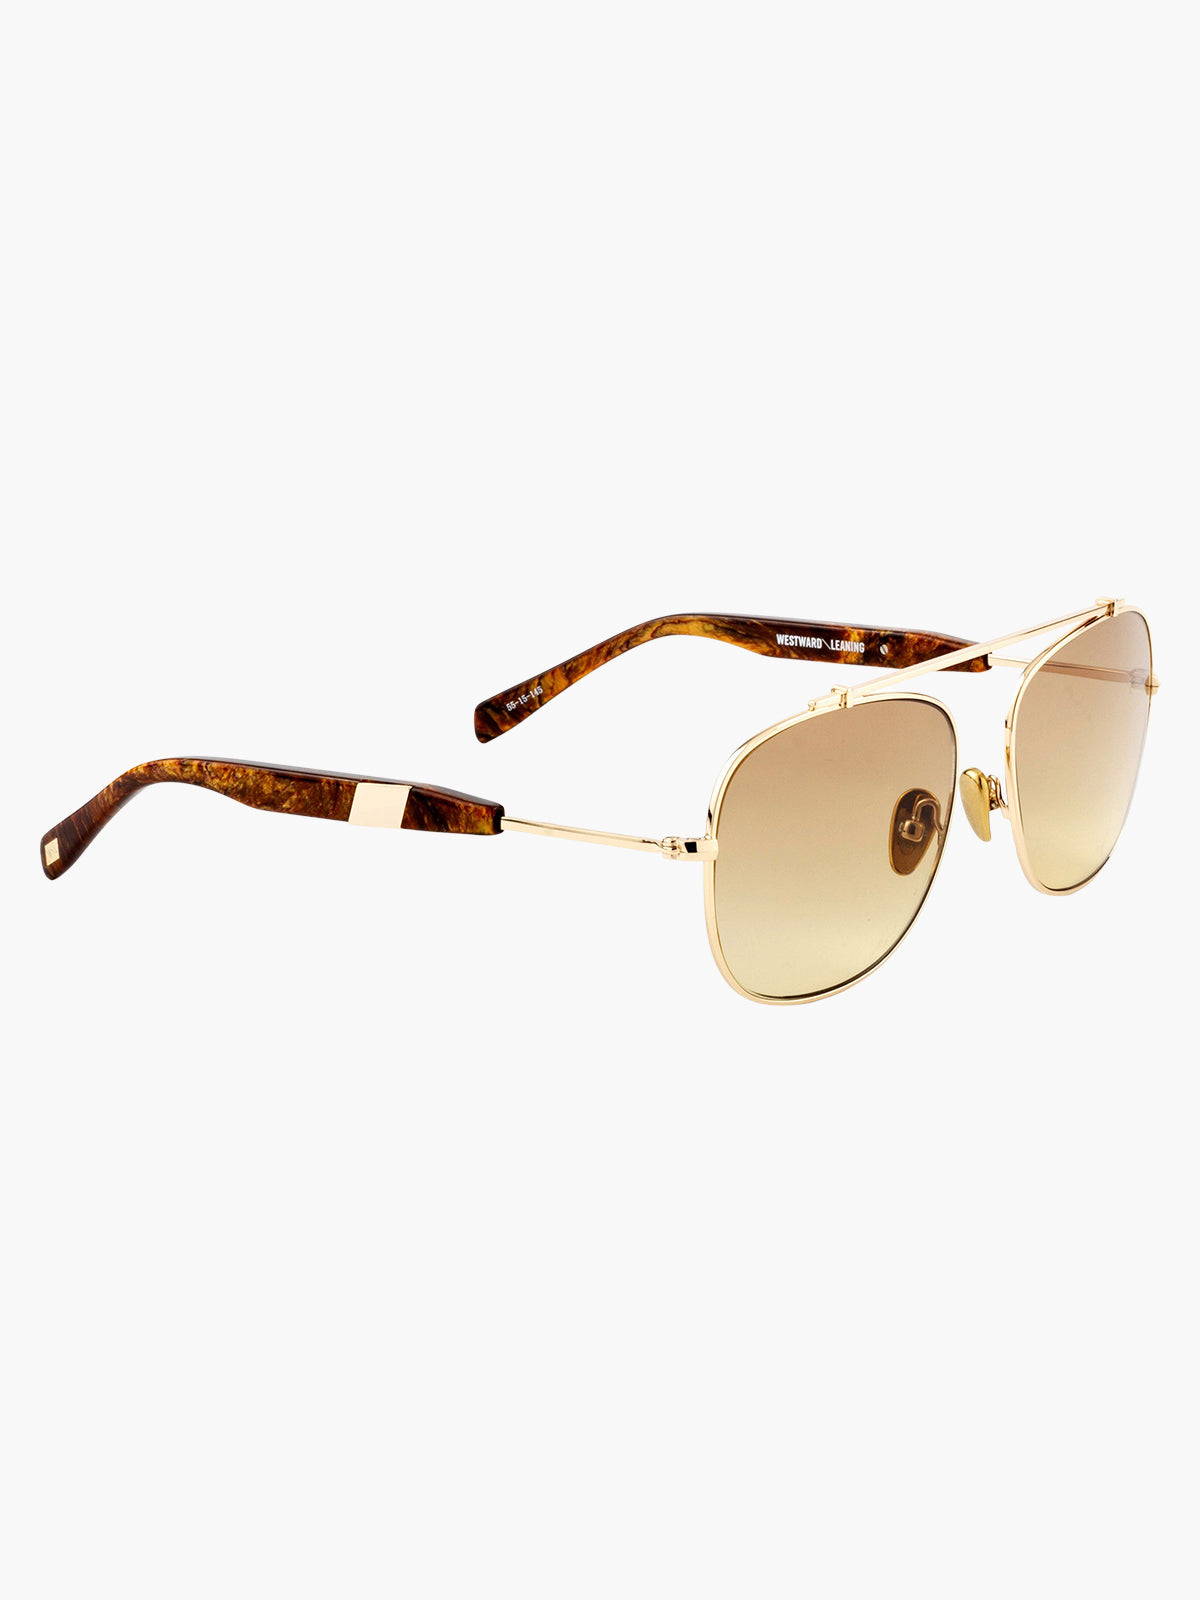 Malcolm No Middle 12 | Polished Gold/Brown Gradient Lens Malcolm No Middle 12 | Polished Gold/Brown Gradient Lens